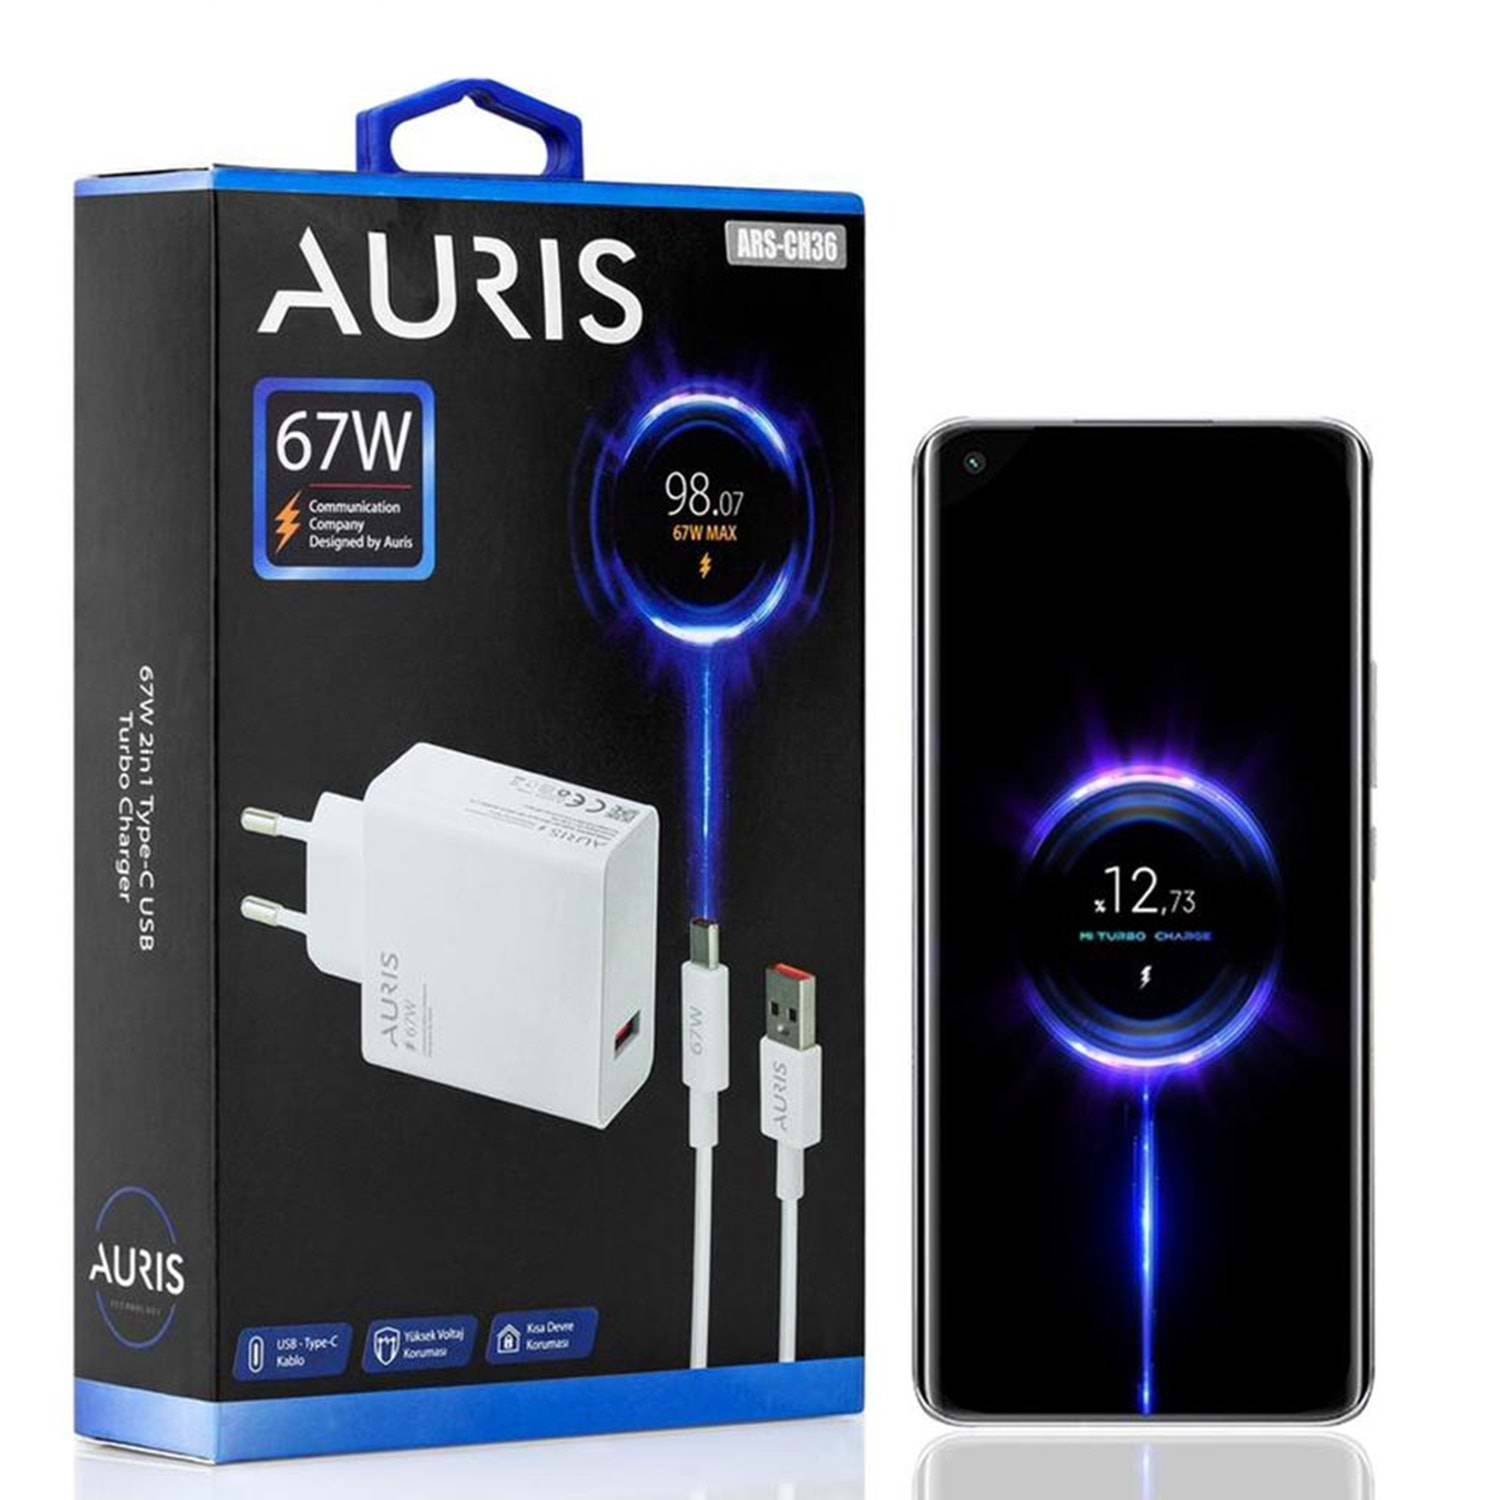 67W AURIS CHARGER TYPE C (1 YEAR WARRANTY)